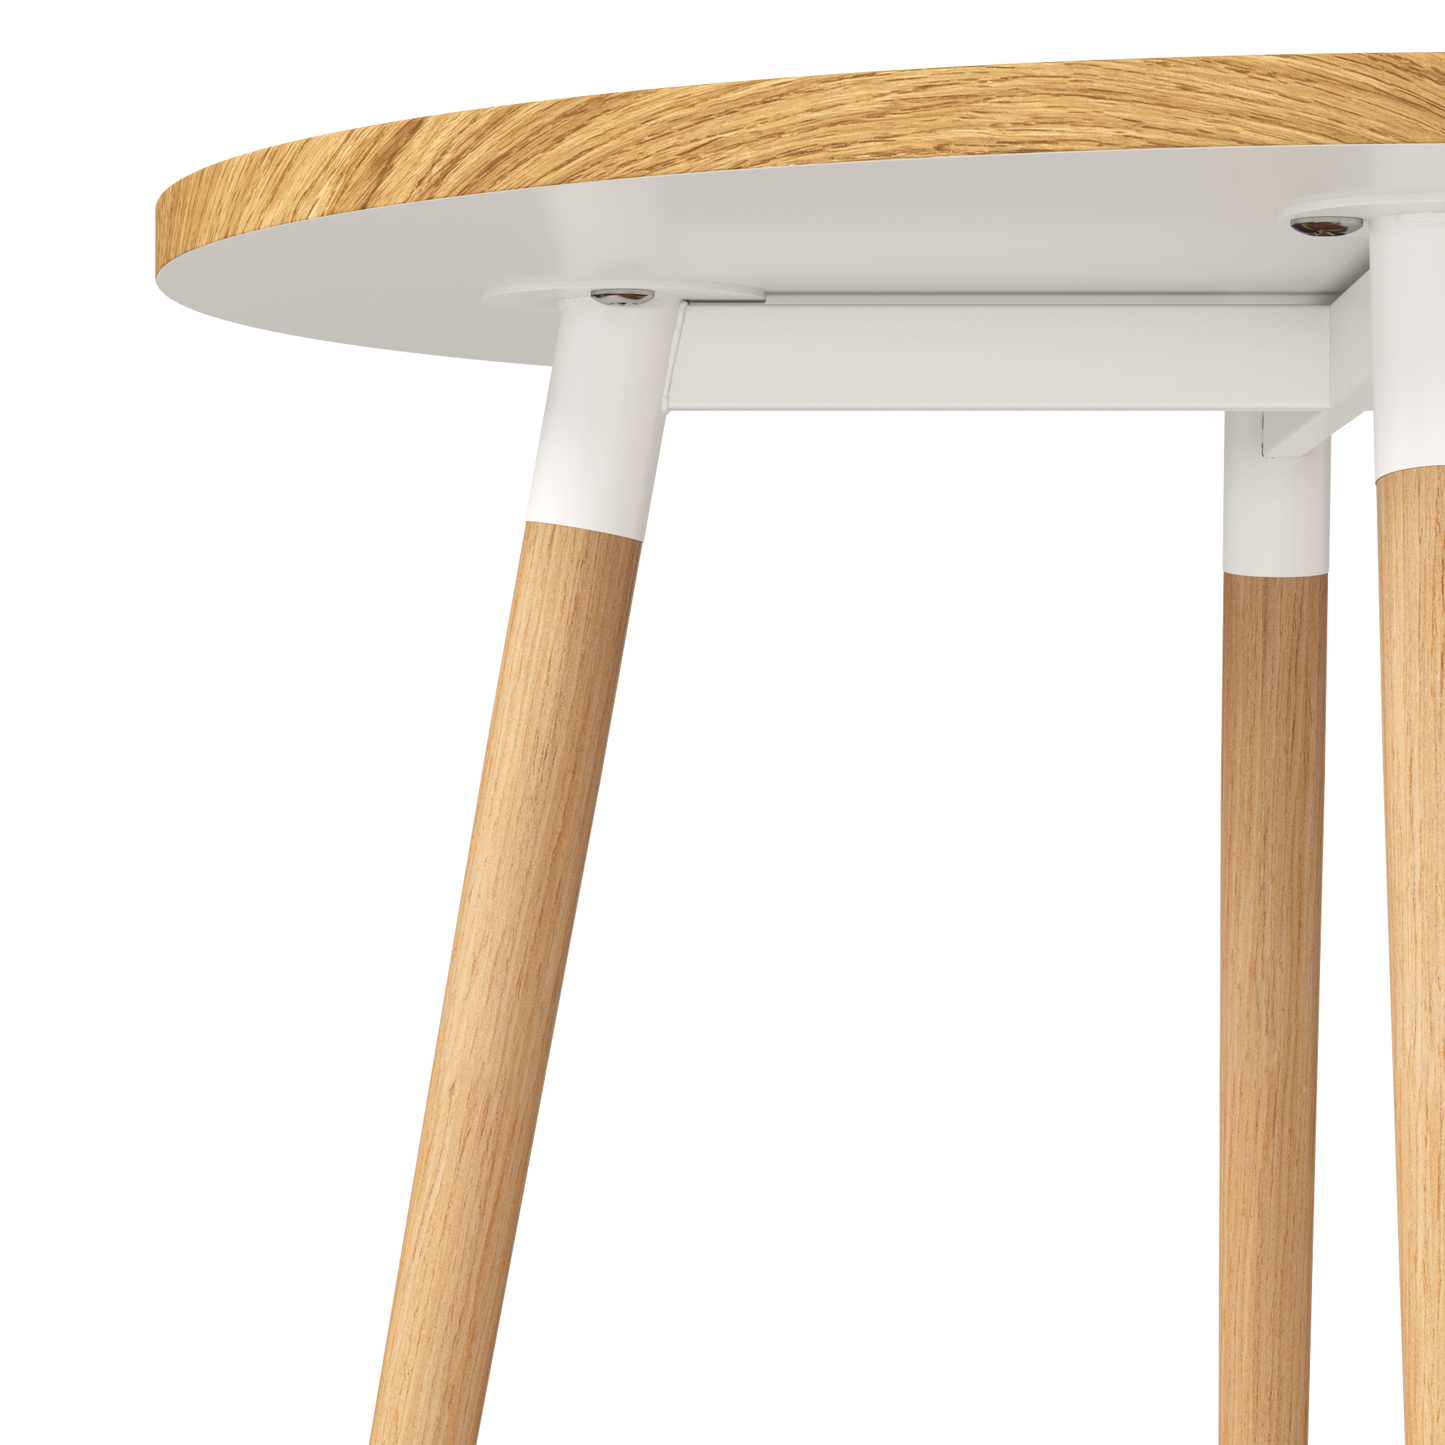 CHOTTO - Enso Round Top Dining Table with Wooden Legs - Wood